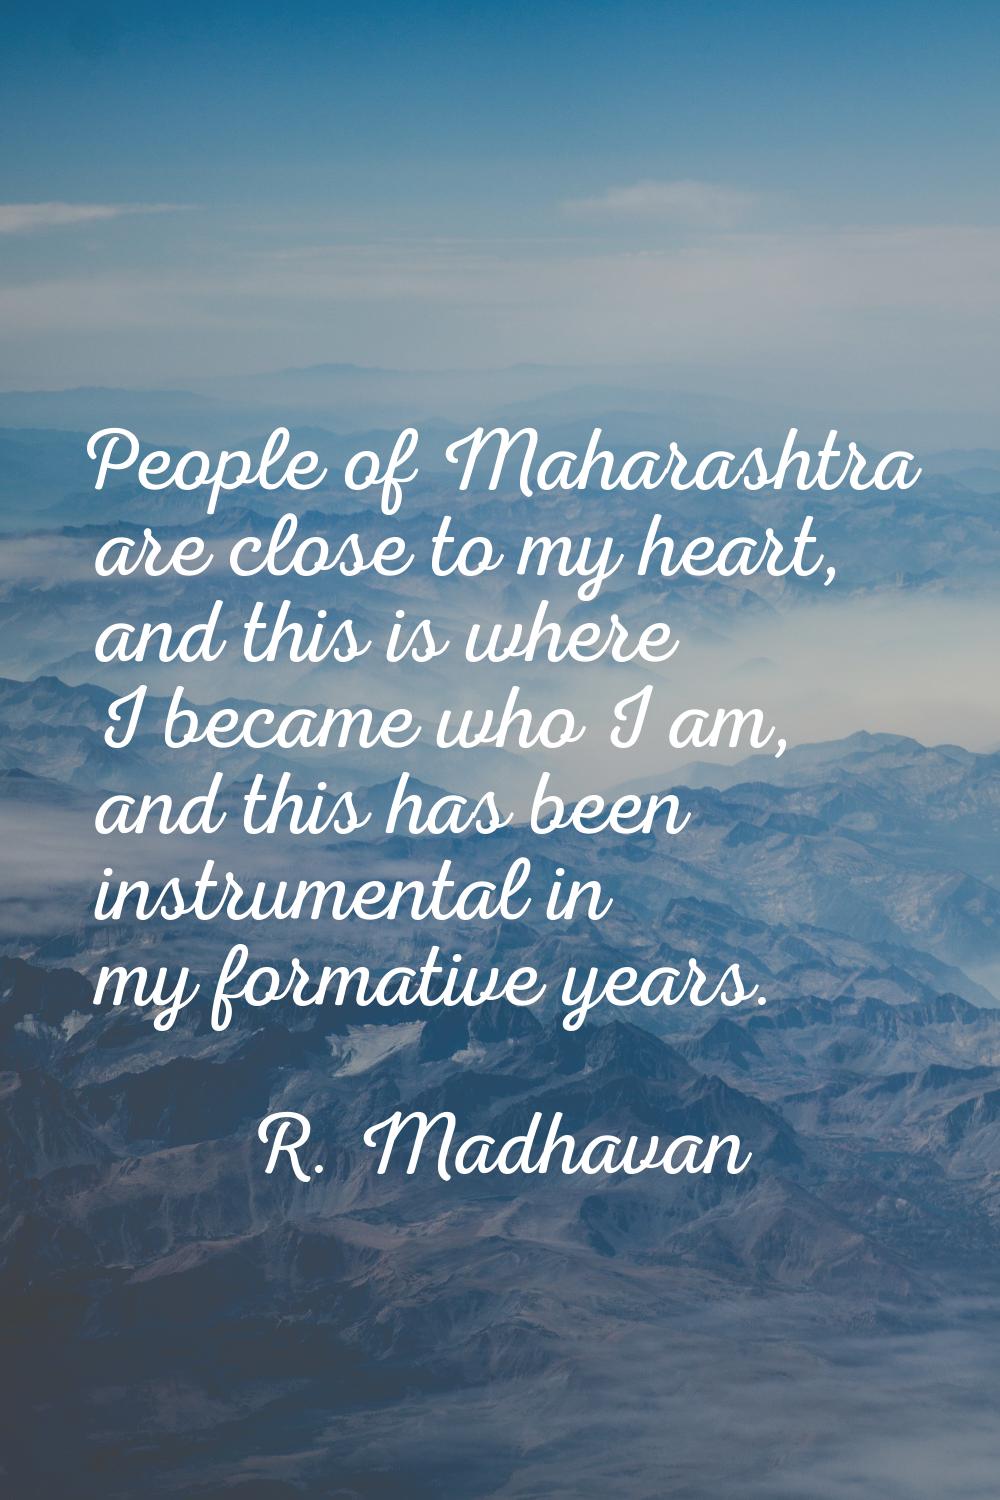 People of Maharashtra are close to my heart, and this is where I became who I am, and this has been